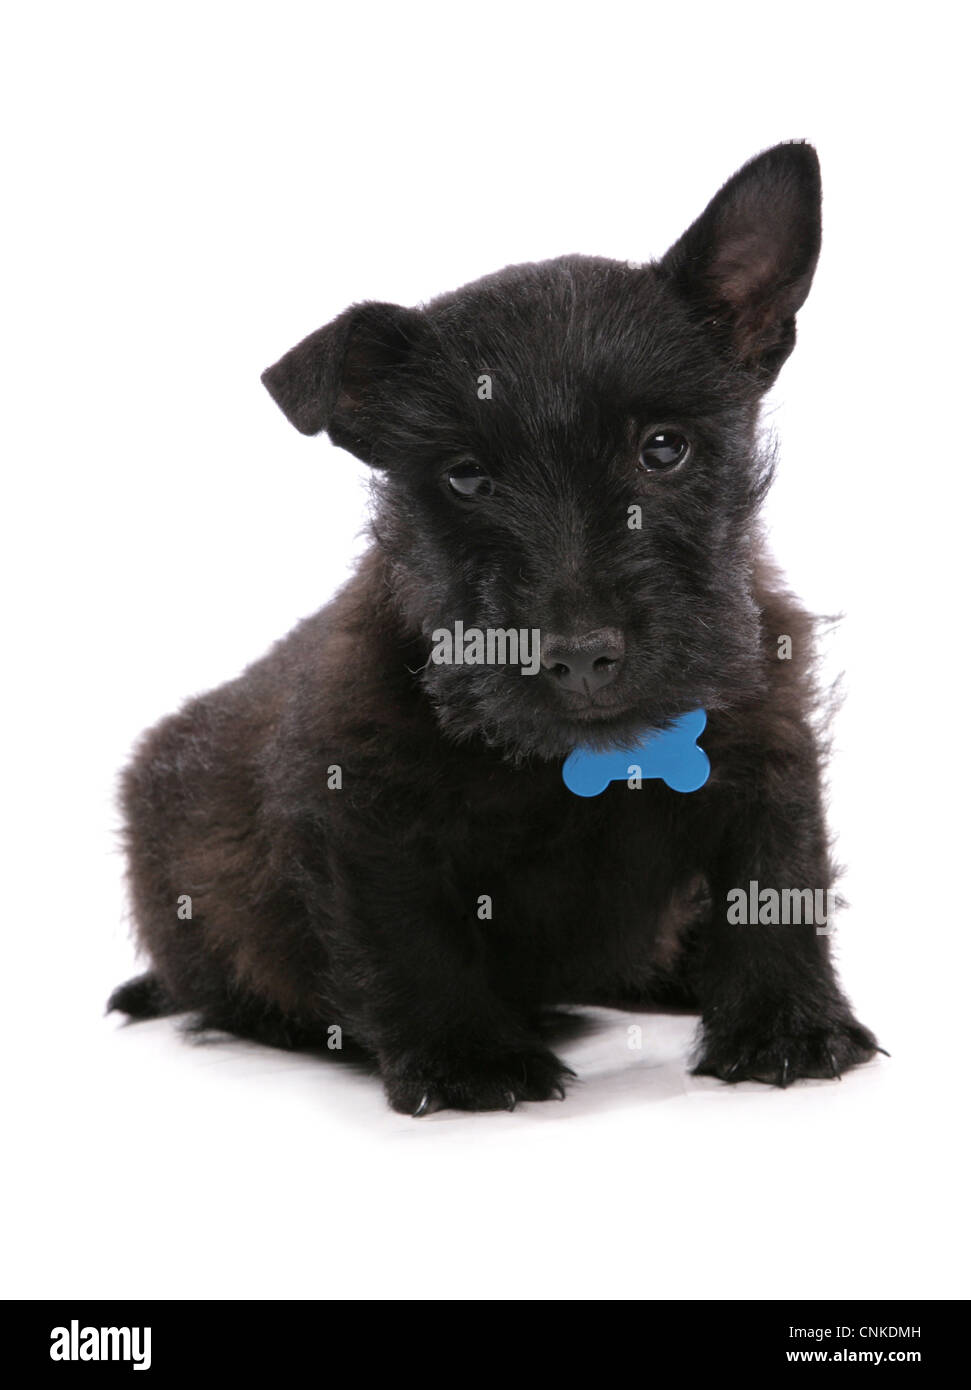 Domestic Dog, Scottish Terrier, puppy, with collar and tag, sitting Stock Photo